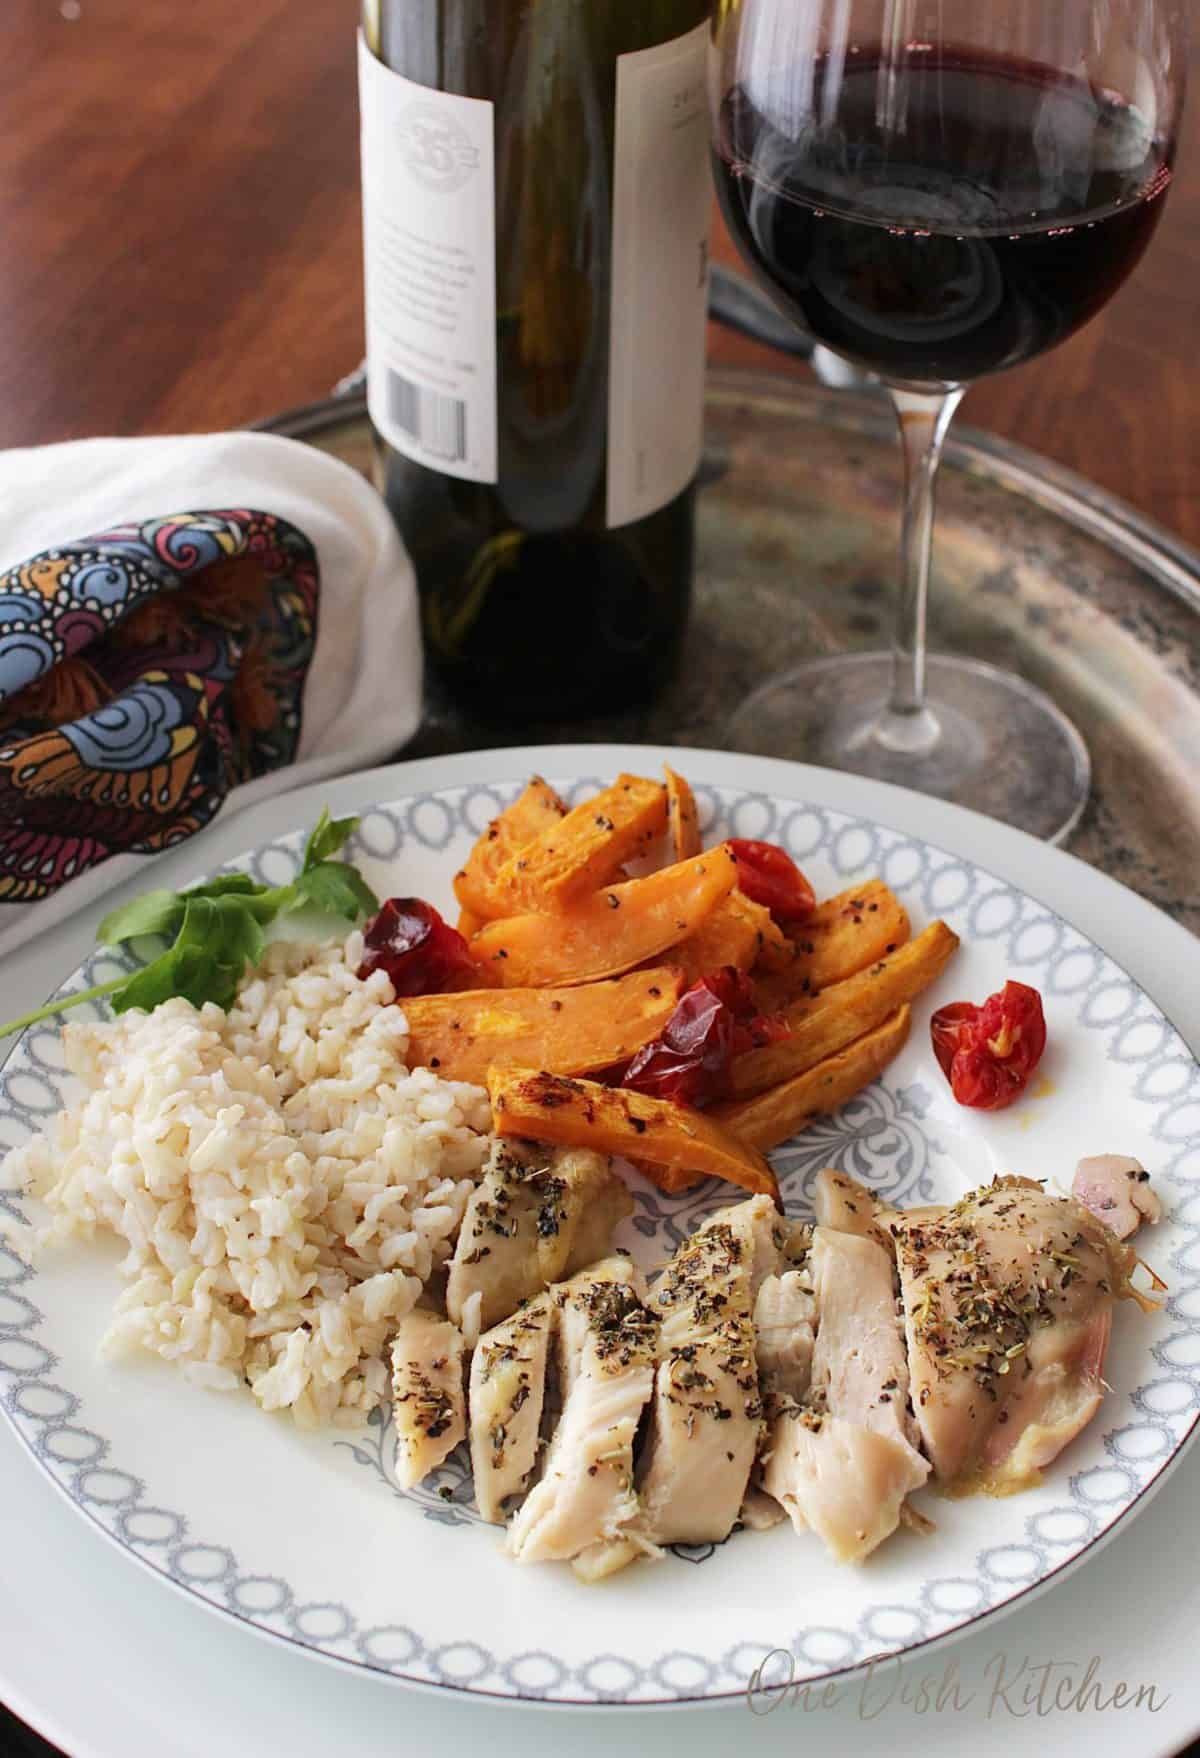 A plate of sliced chicken with roasted sweet potatoes slices, roasted cherry tomatoes, and brown rice next to a glass of red wine all on a metal tray